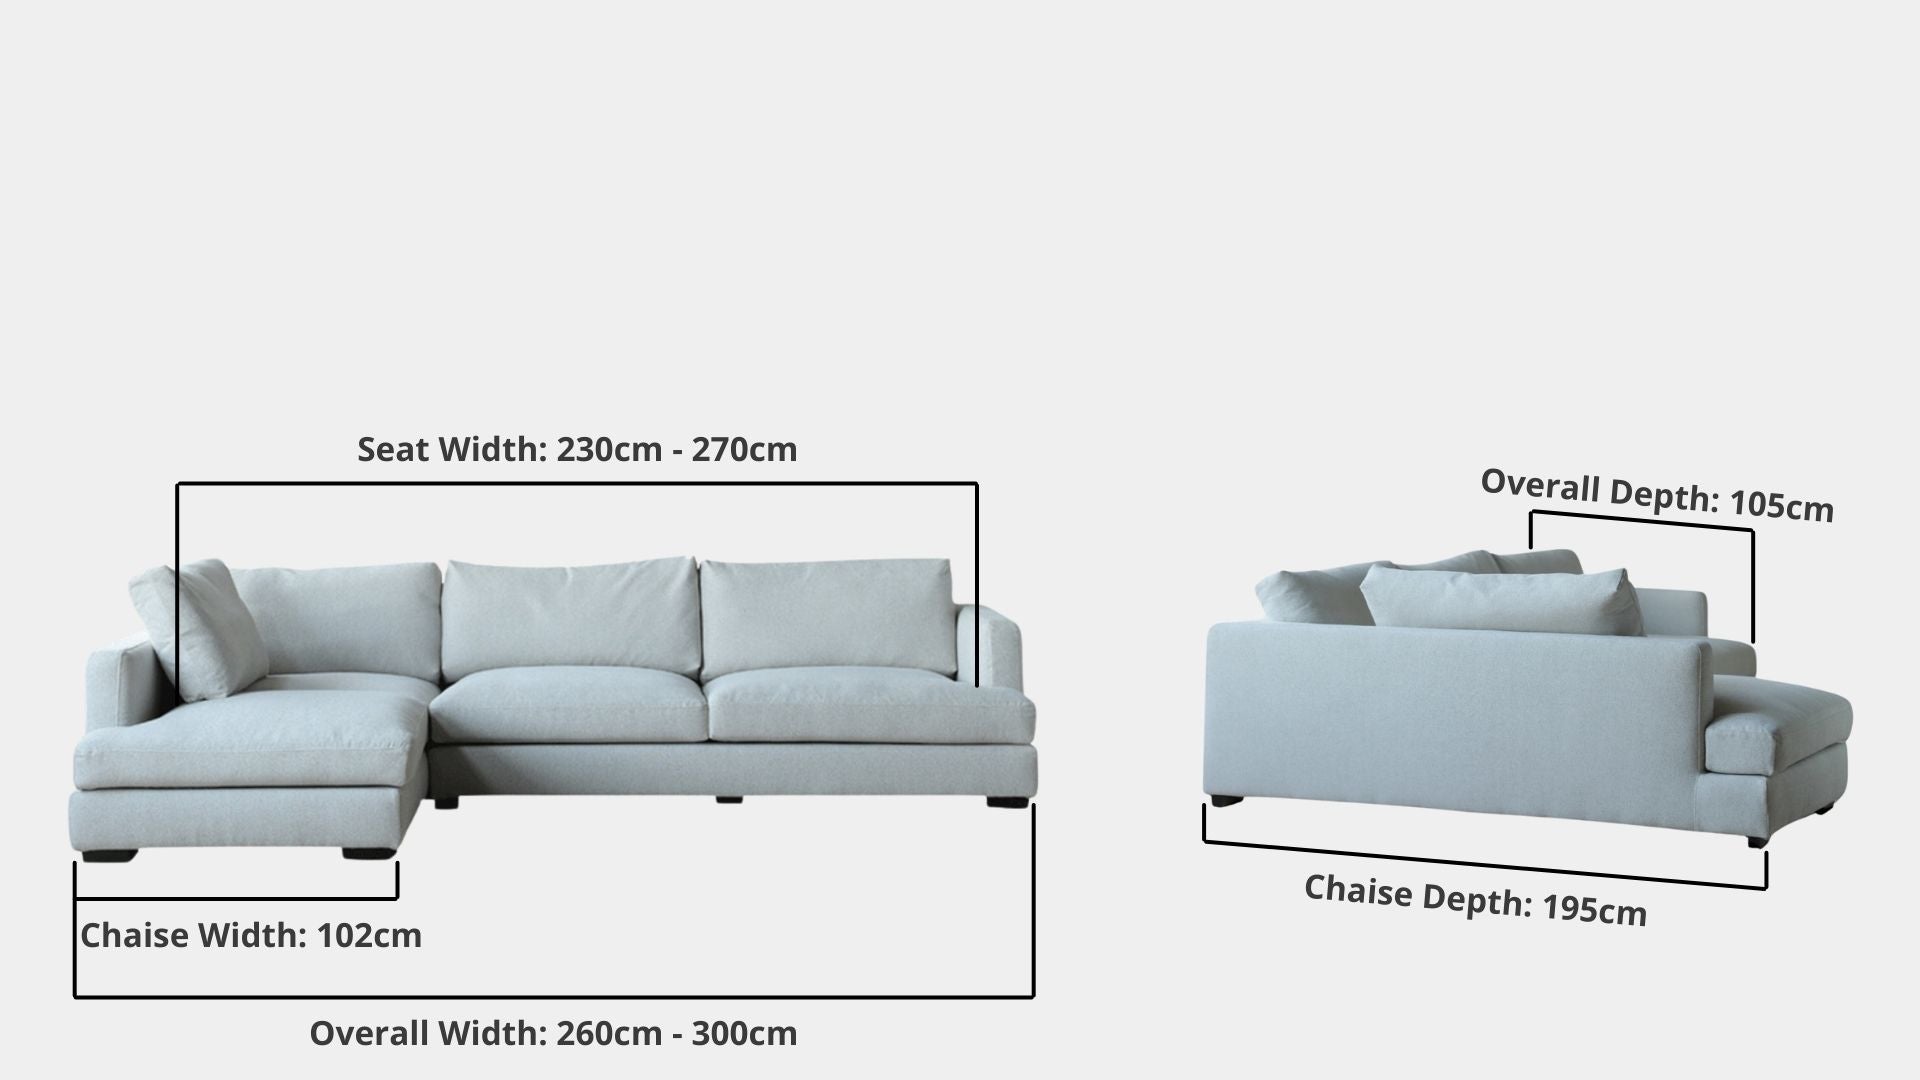 Details the key dimensions in terms of overall width, overall depth and seat width for Crescent Fabric Sectional Sofa